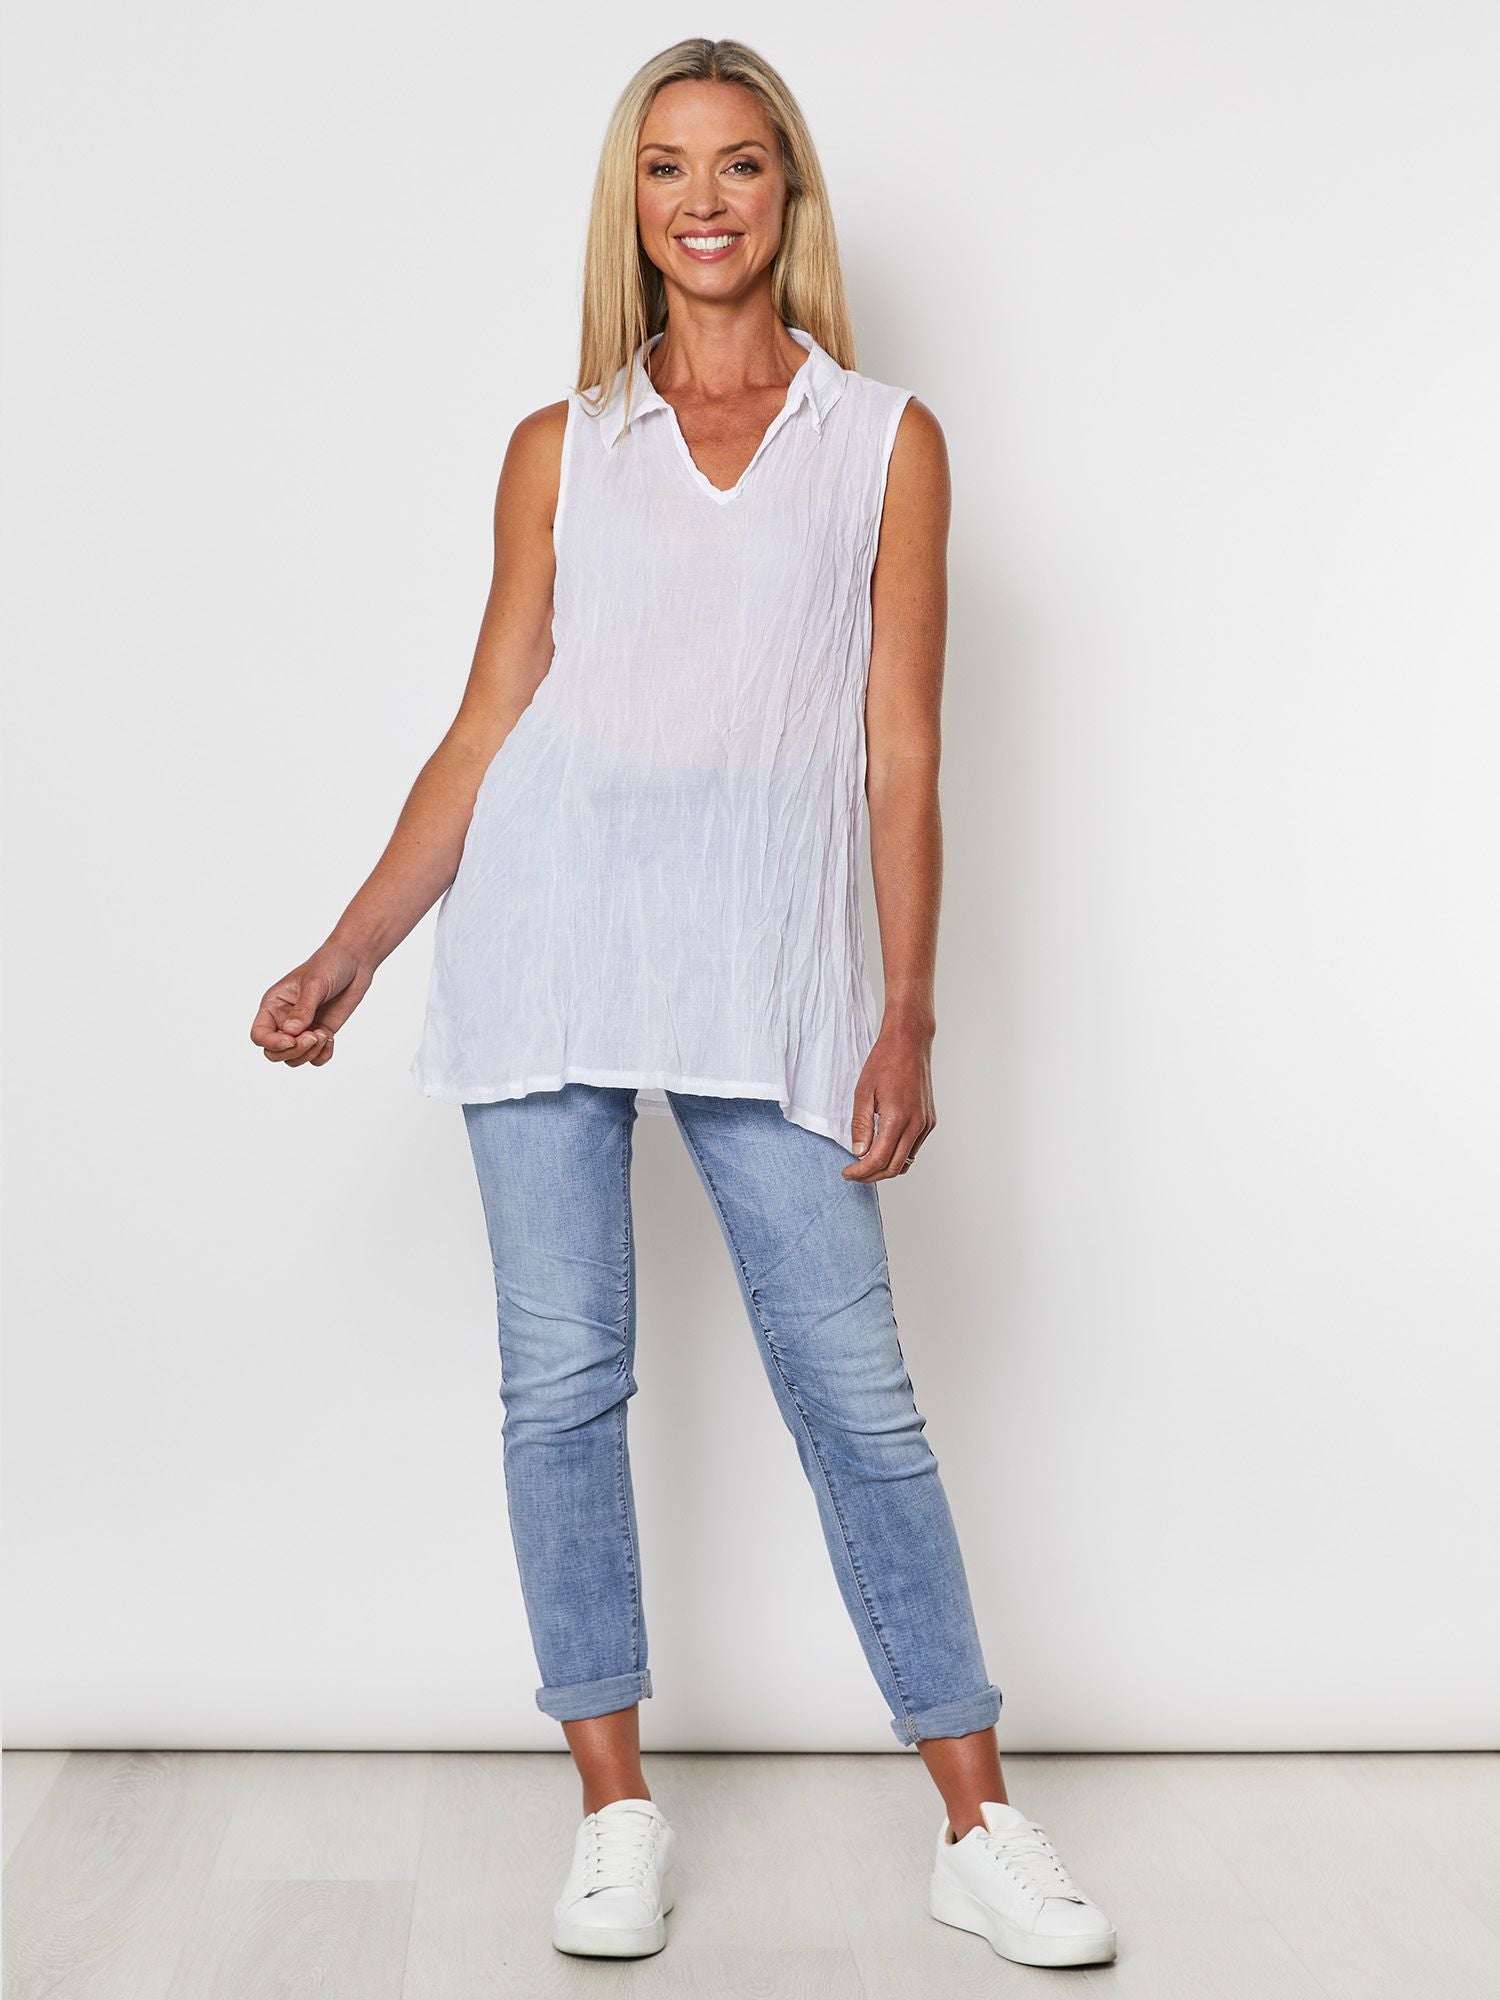 Collared Crushed Layering Top - White